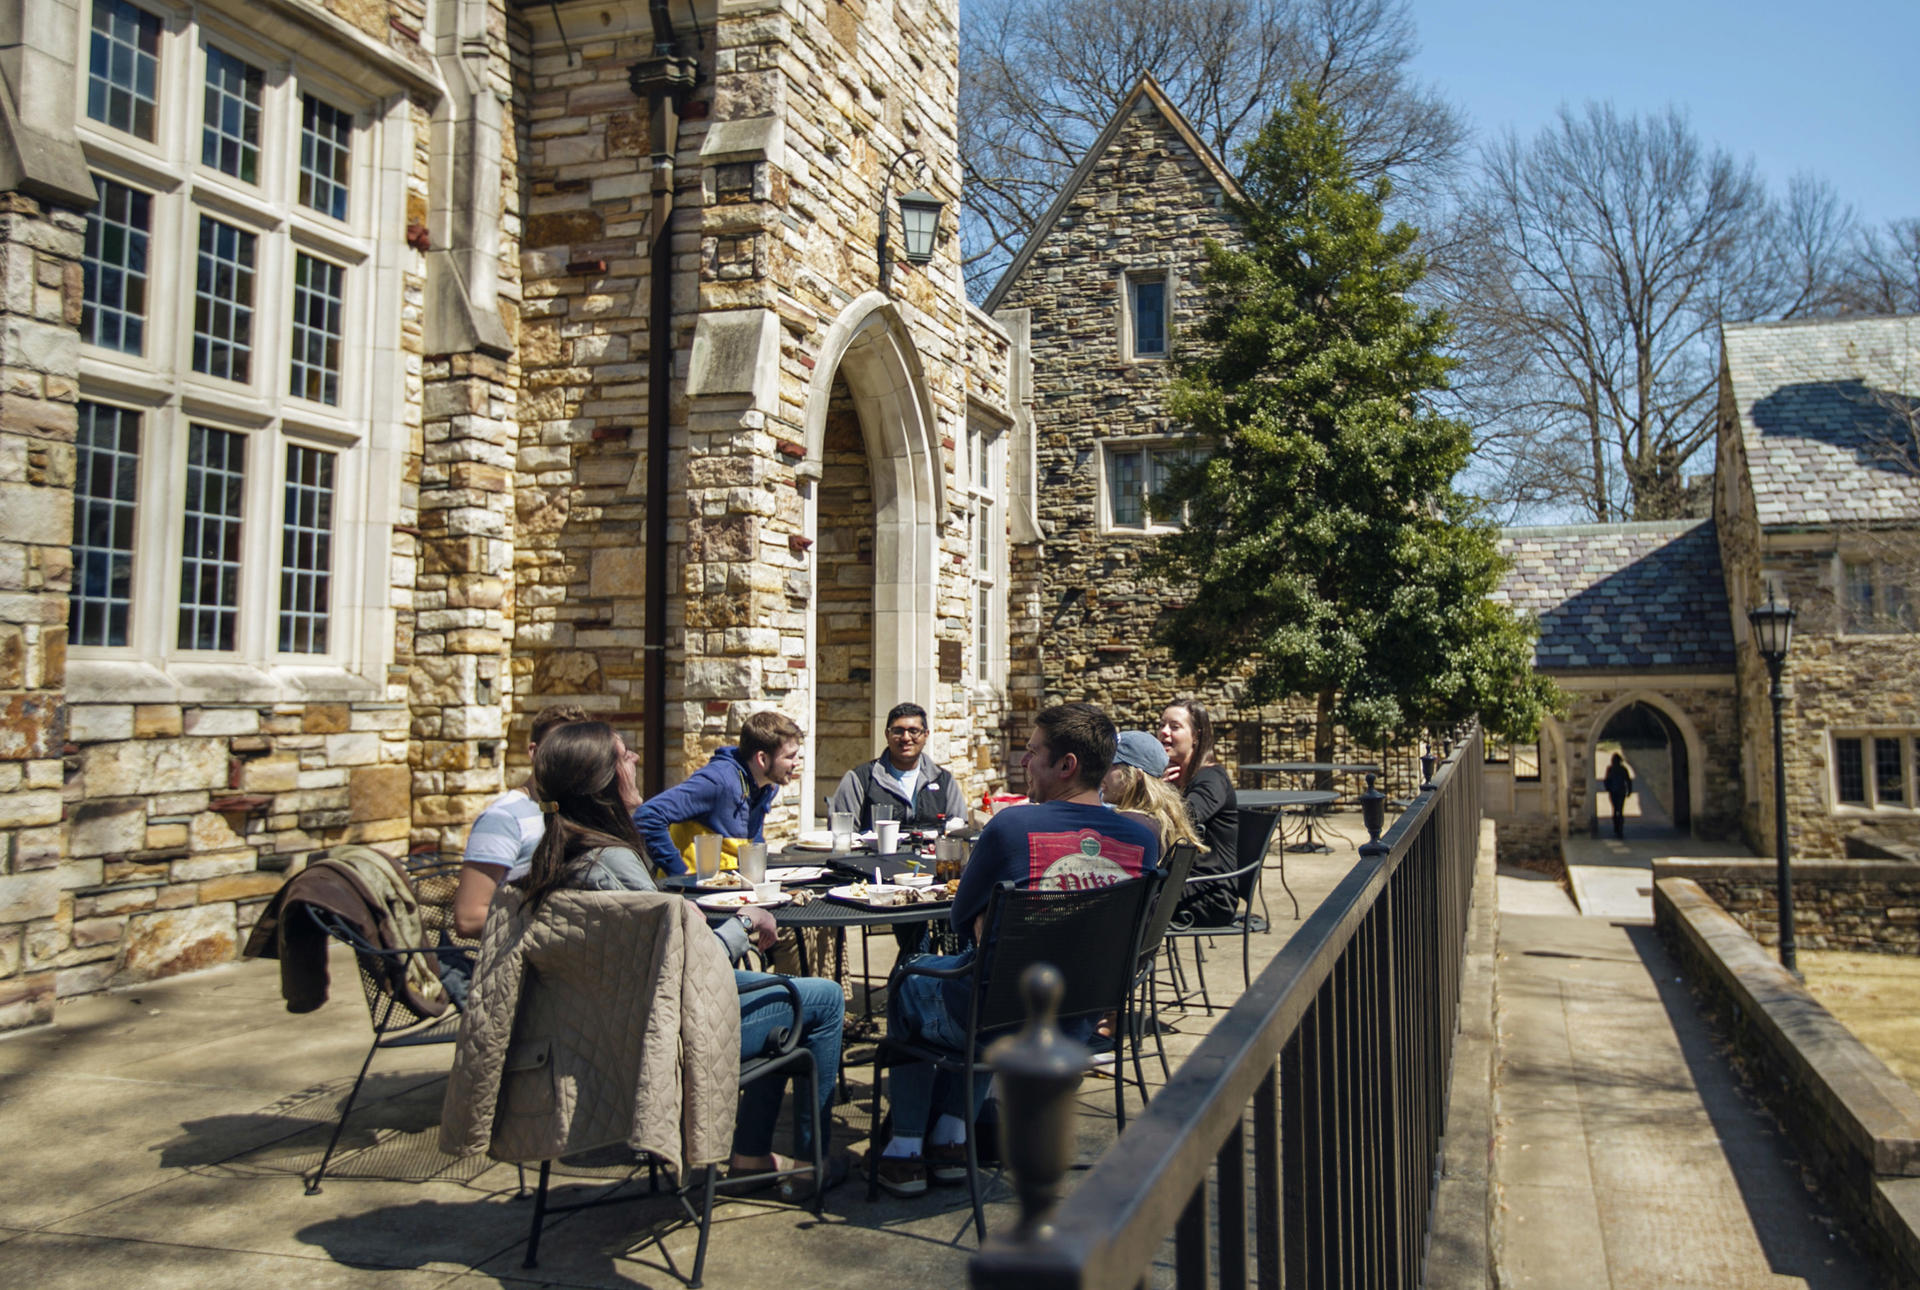 students on a patio of a gothic stone building